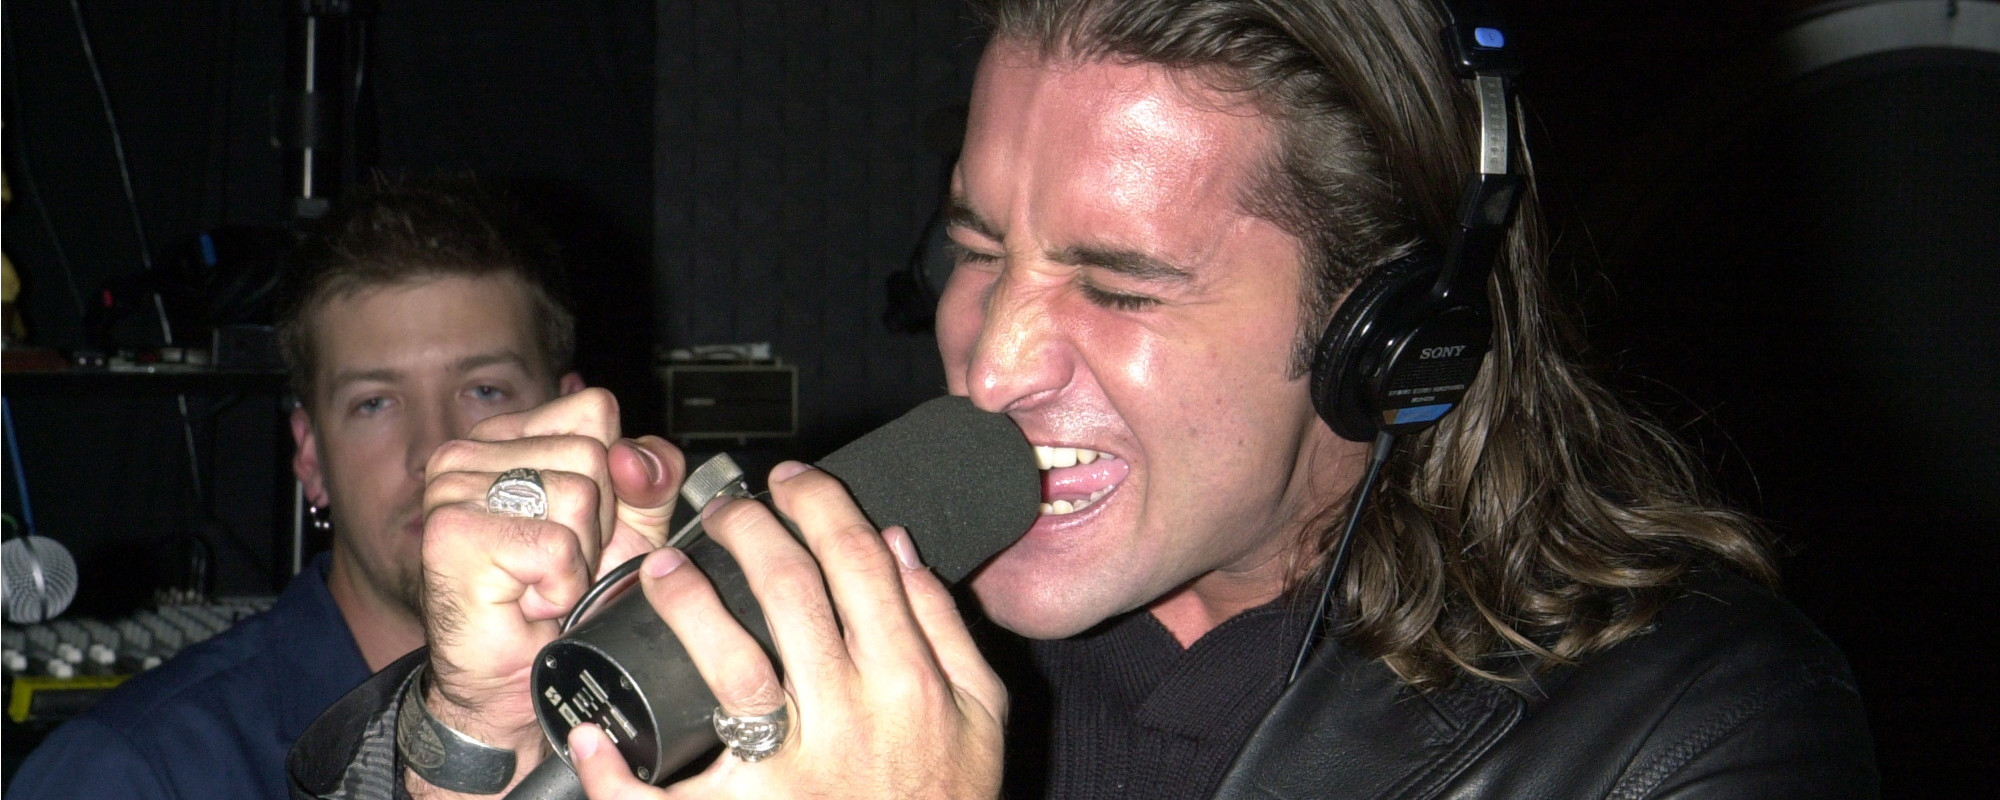 Scott Stapp Teases New Creed Music: “I Think It’s Gonna be Beautiful, Man”